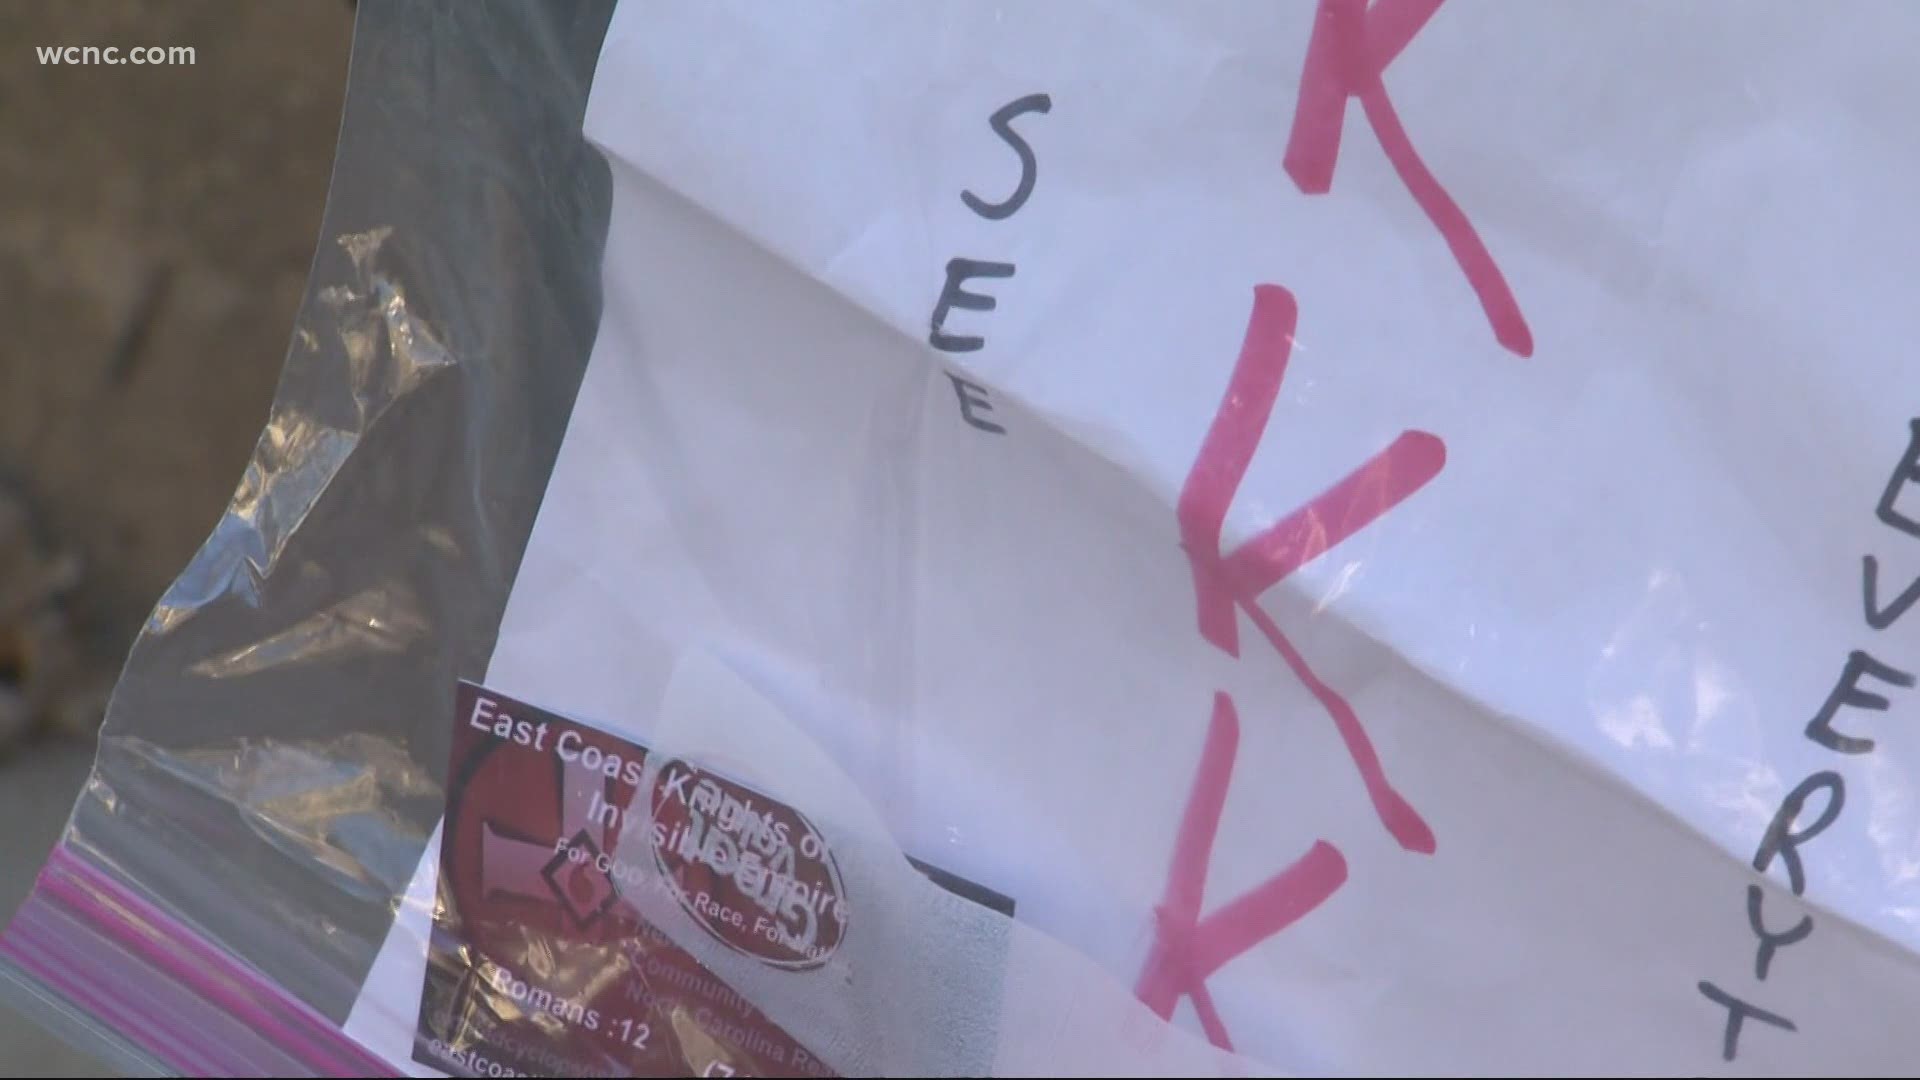 In March, she said she was among Statesville residents who received a KKK flyer. Sunday morning, she found a Confederate flag hanging at her apartment.